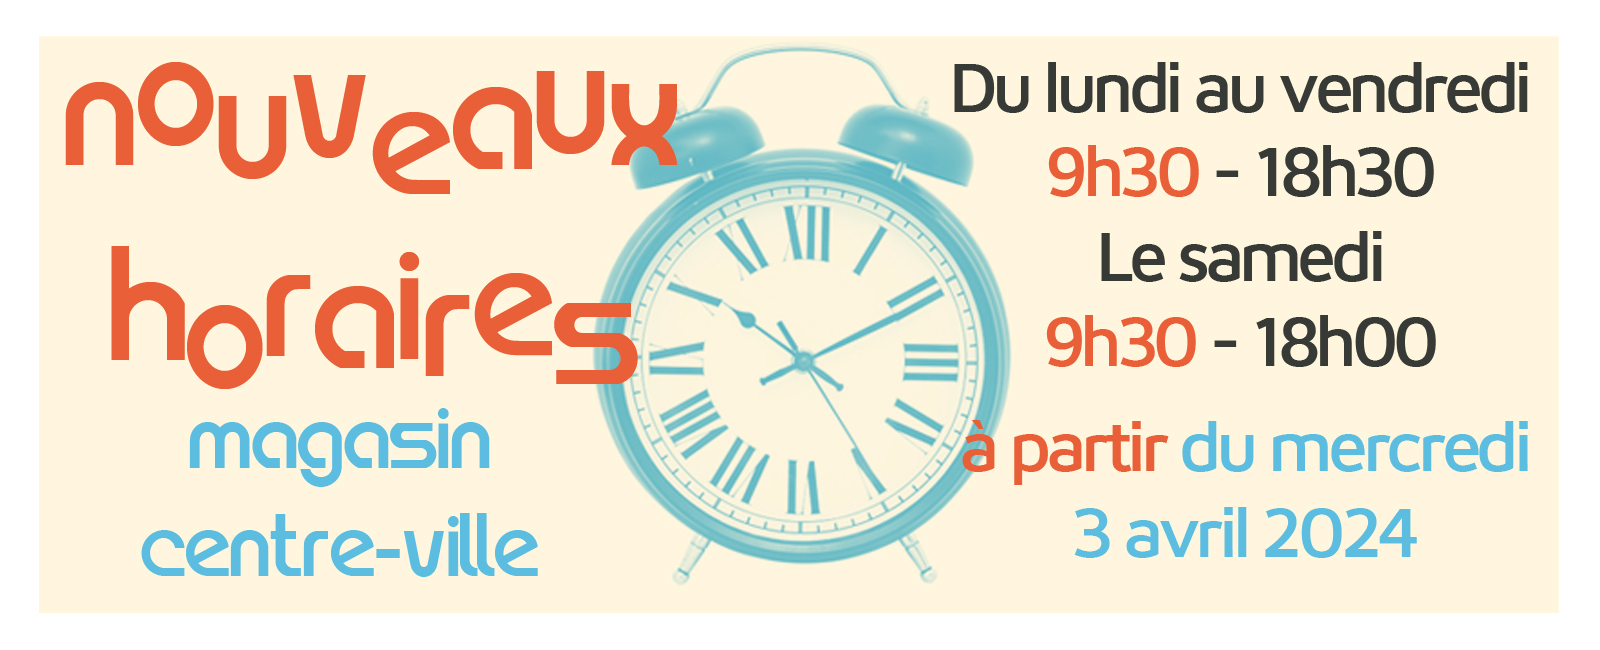 HORAIRES SEB PAPETERIE